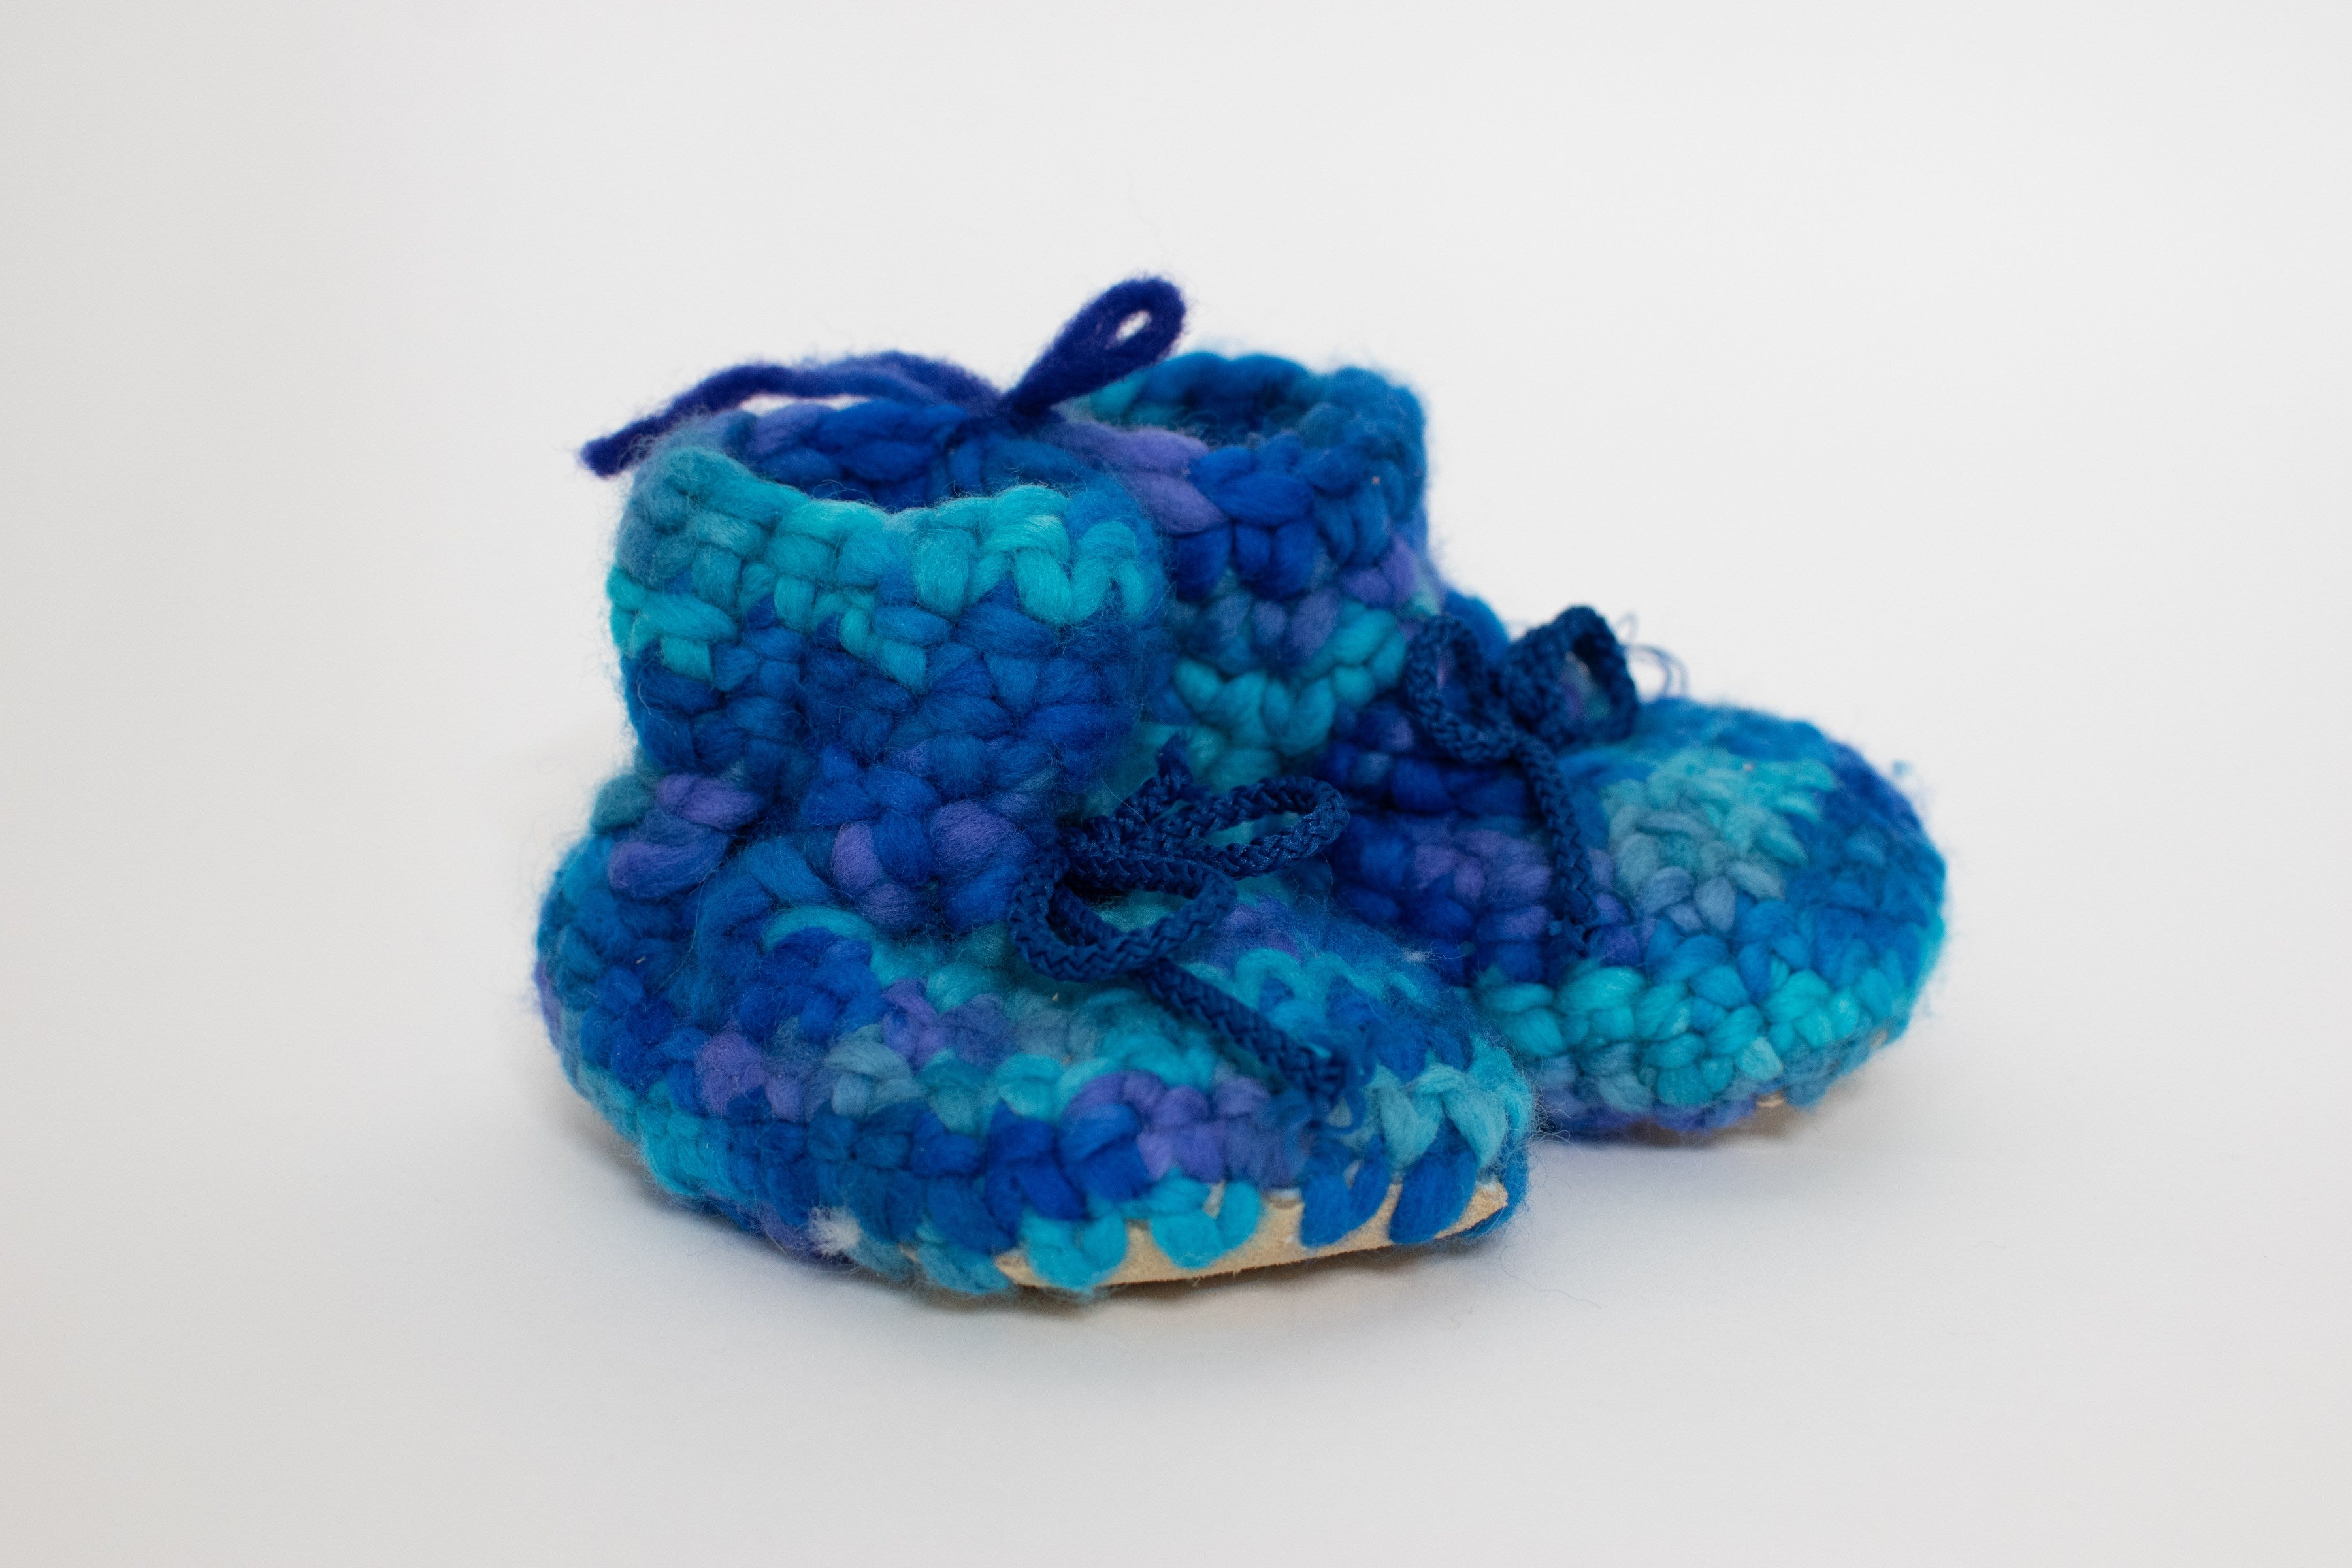 Canadian Comfy Cozies <br>Child Slippers